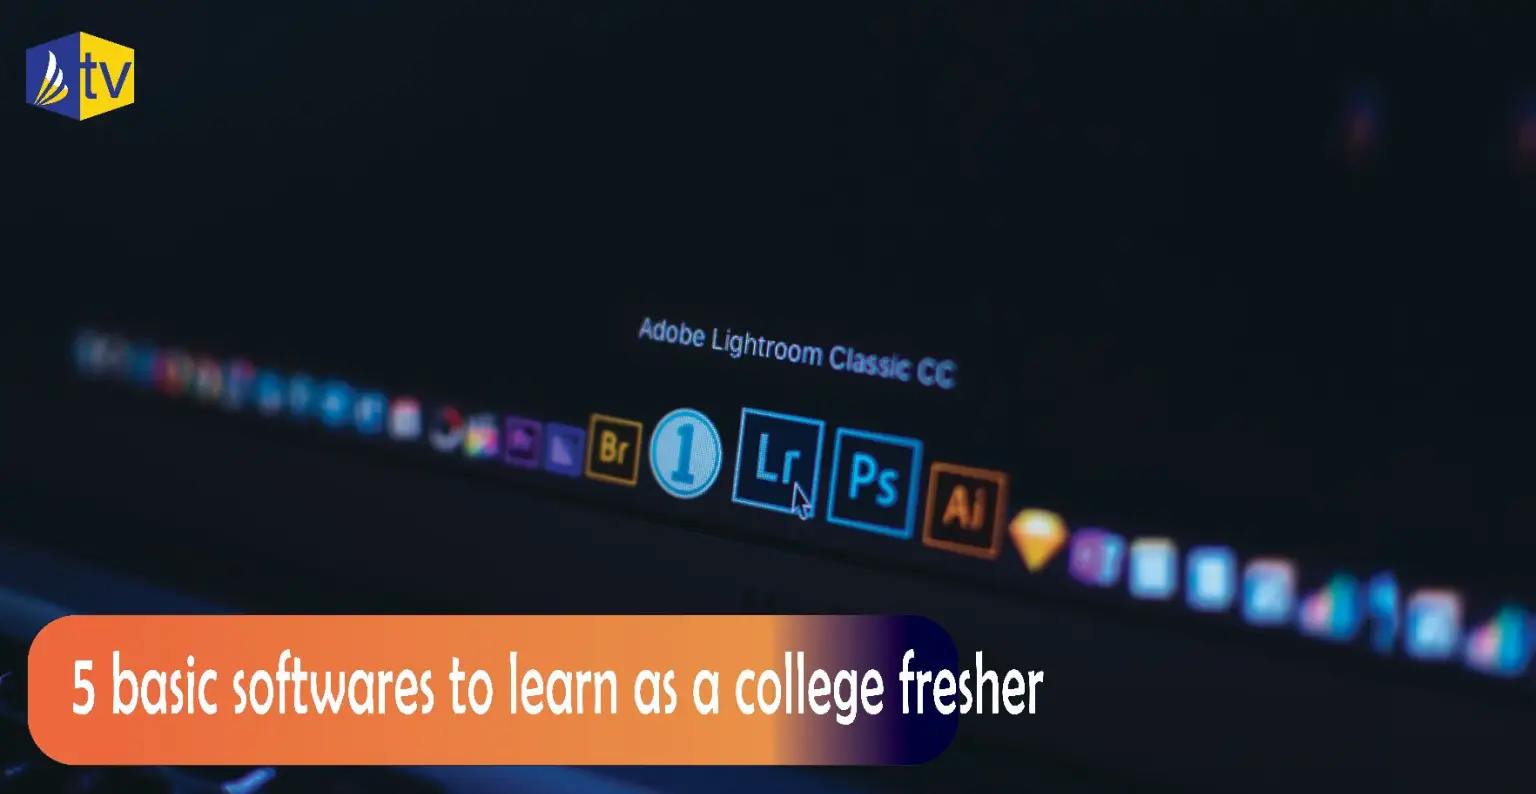 5 softwares to learn as a college fresher